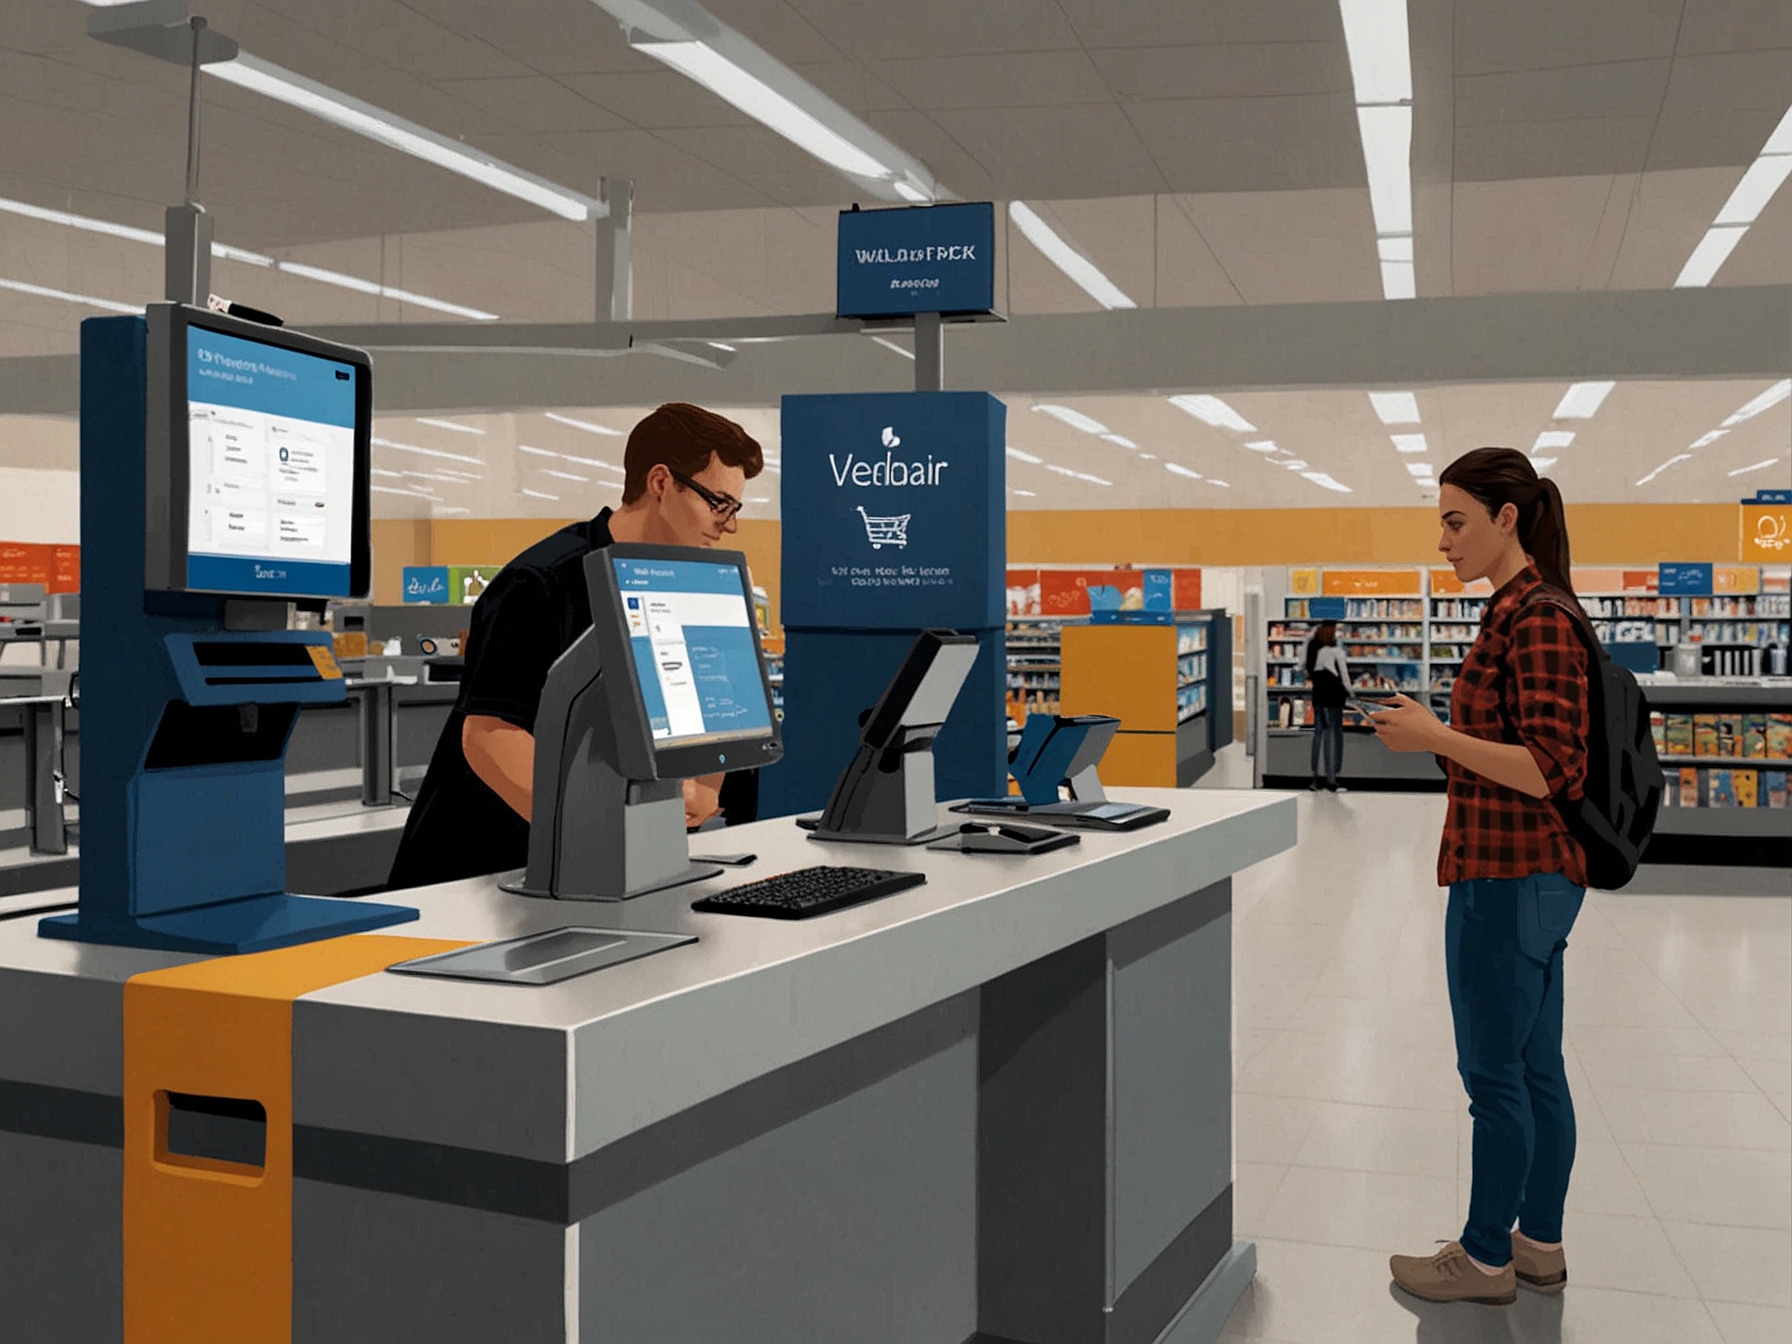 An image showing a customer at a Walmart self-checkout counter, scanning items. The focus should be on the scanning process to highlight the self-checkout system.